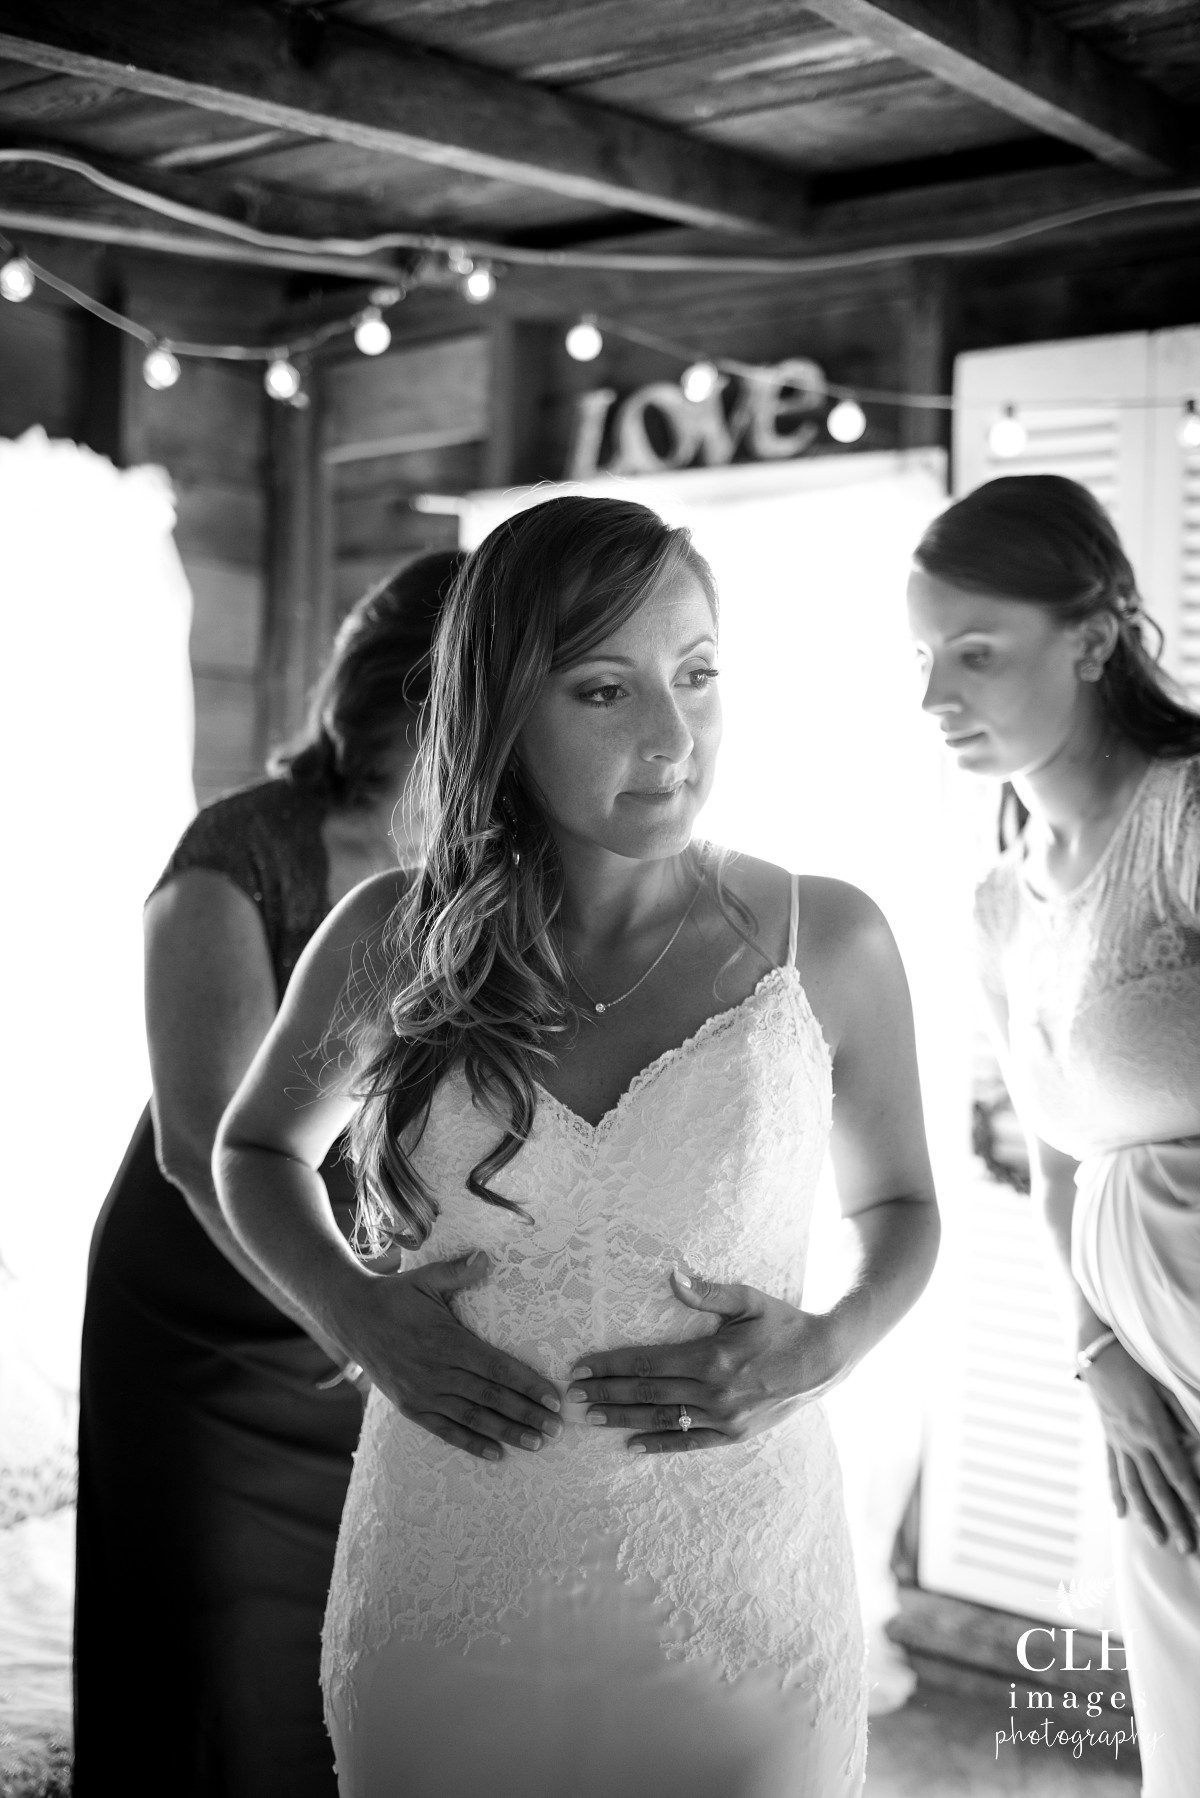 CLH images Photography - Adirondack Weddings - Adirondack Photographer - Rustic Wedding - Barn Wedding - Burlap and Beams Wedding - Jessica and Ryan (18)